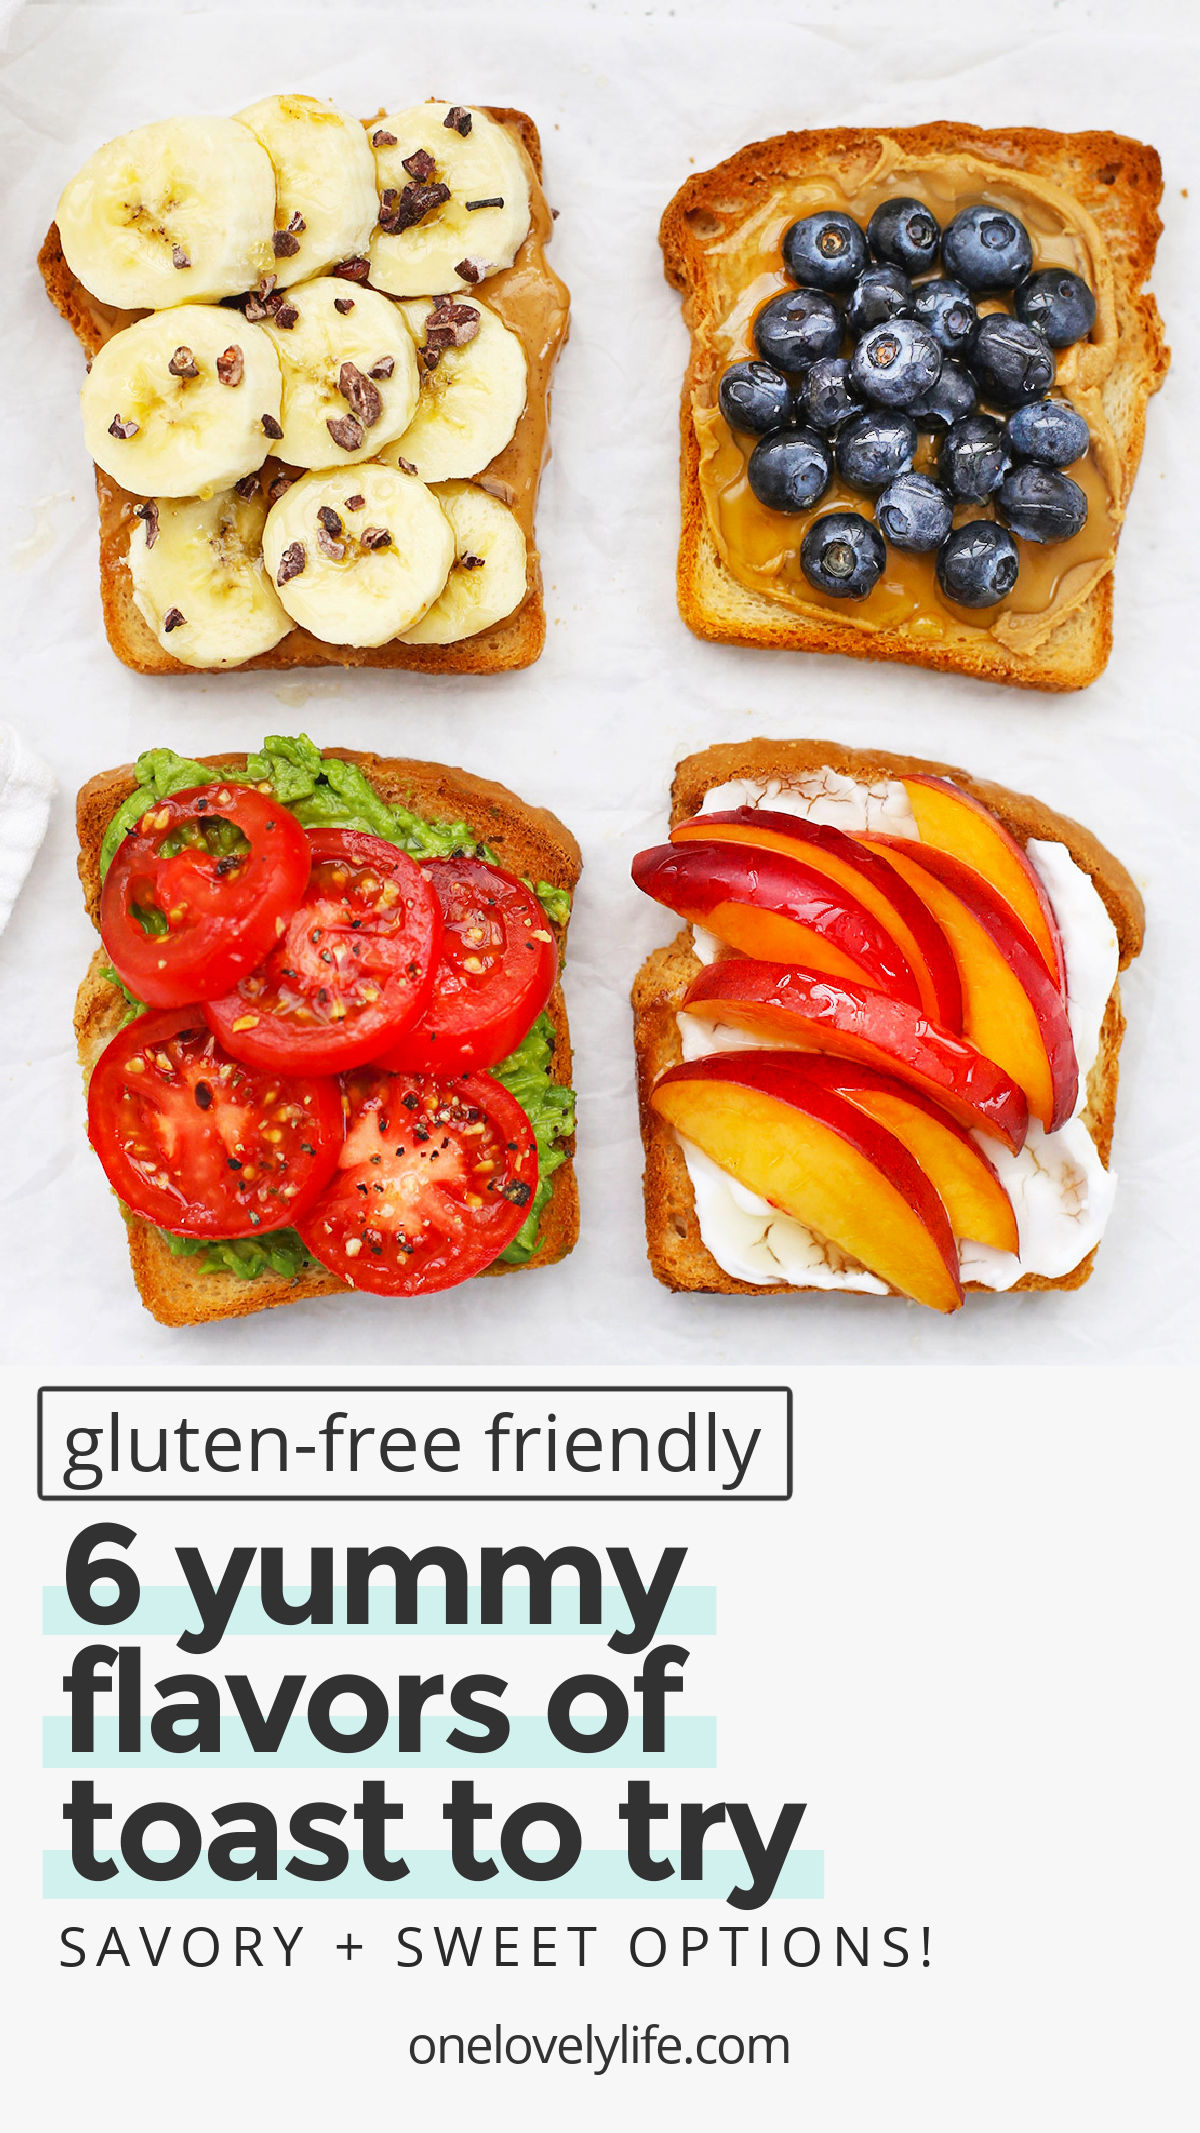 Yummy Toast Flavors to Try - These tasty toast ideas are the perfect way to get creative at breakfast, lunch, or snack. Choose from our lists of topping ideas or try one of our 6 favorite combinations. (Gluten-Free + Vegan Options) // Gluten-Free Toast // Creative Toast Ideas // Breakfast // brunch // hummus toast // avocado toast #toast #breakfast #brunch #snack